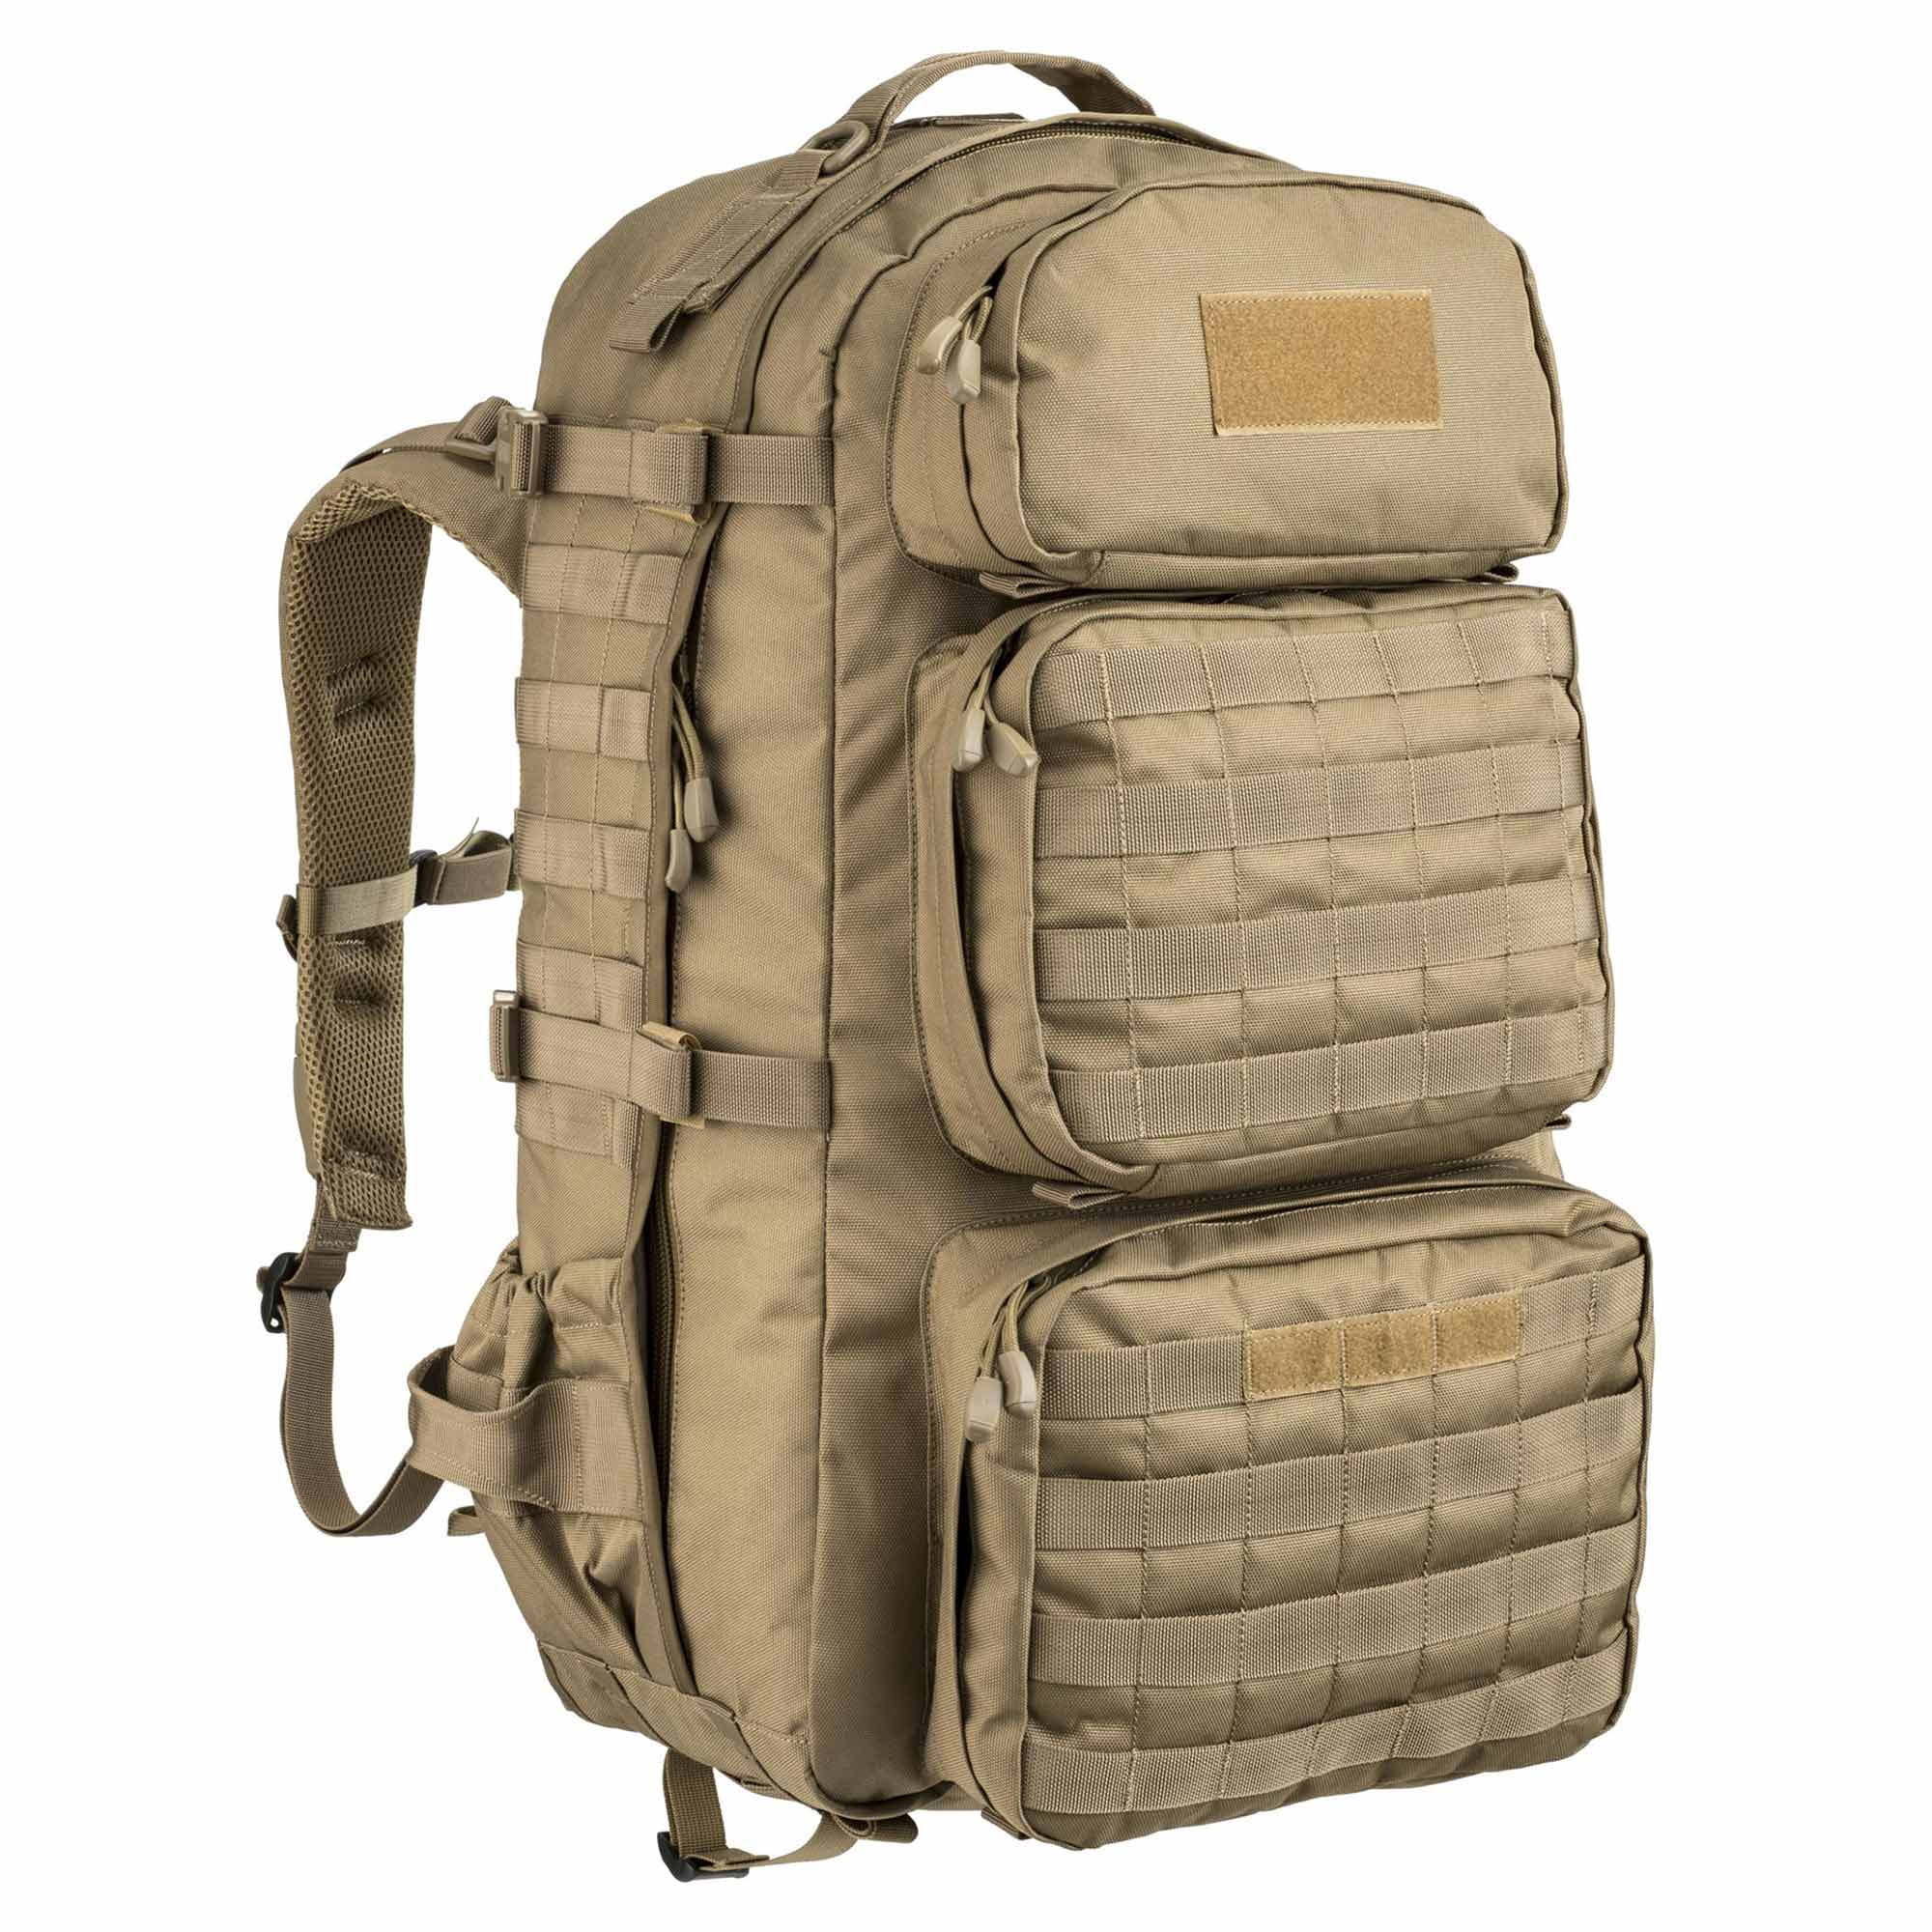 Defcon 5 Ares Backpack 50 L coyote tan | Defcon 5 Ares Backpack 50 L ...